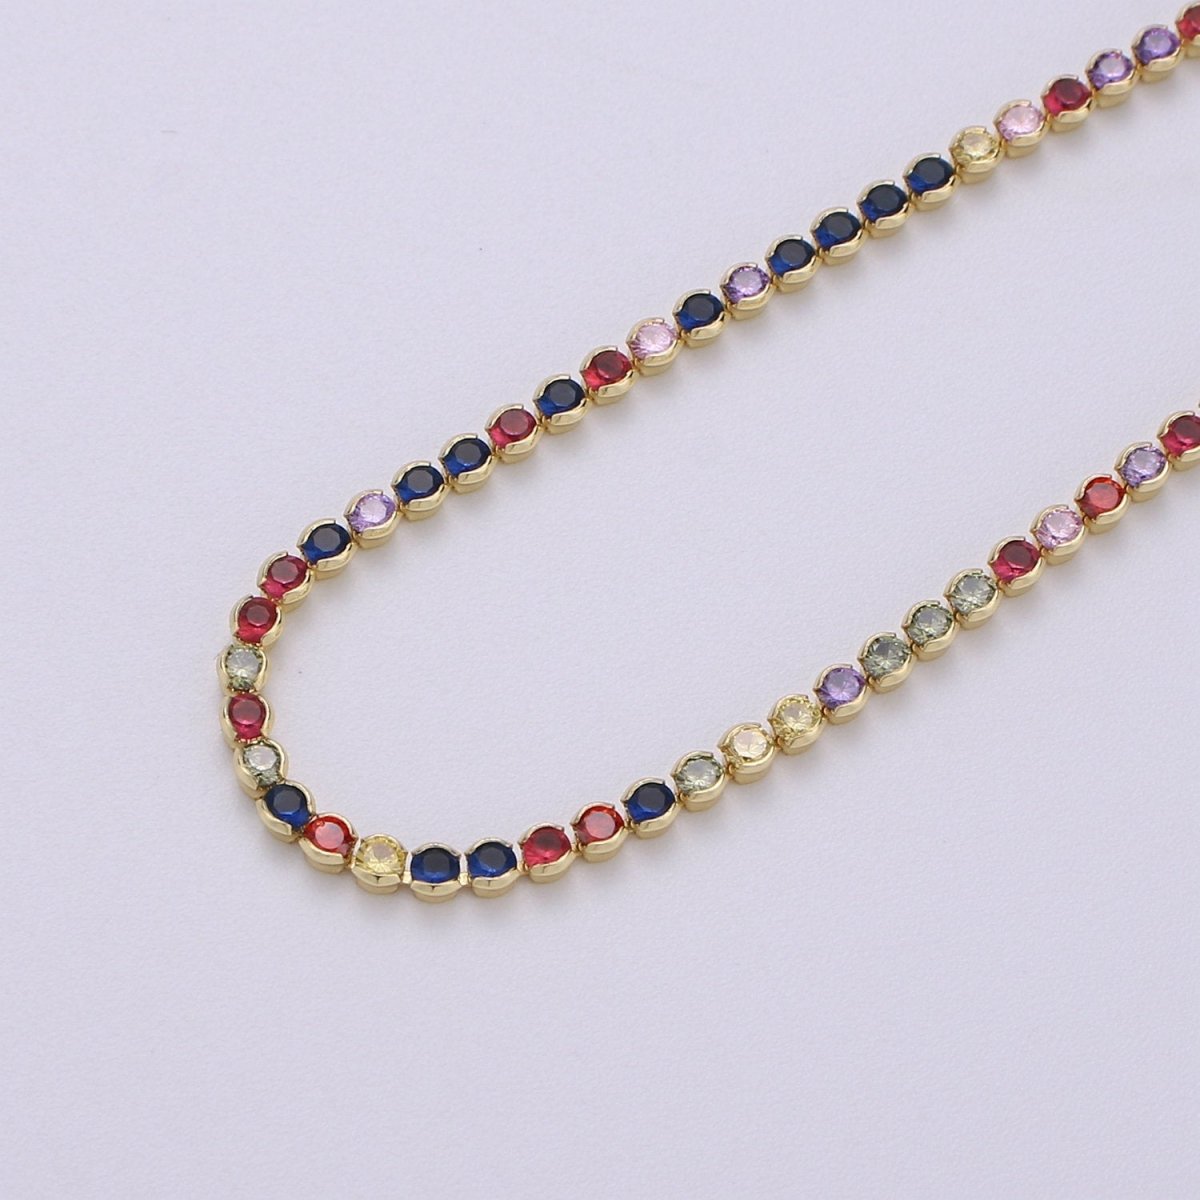 Micro Pave Tennis Chain / 14k Gold Filled / Micro Pave Choker Chain / Tennis Chain Choker Necklace Multi Color Rainbow CZ Chain | CN-779, CN-896 Clearance Pricing - DLUXCA